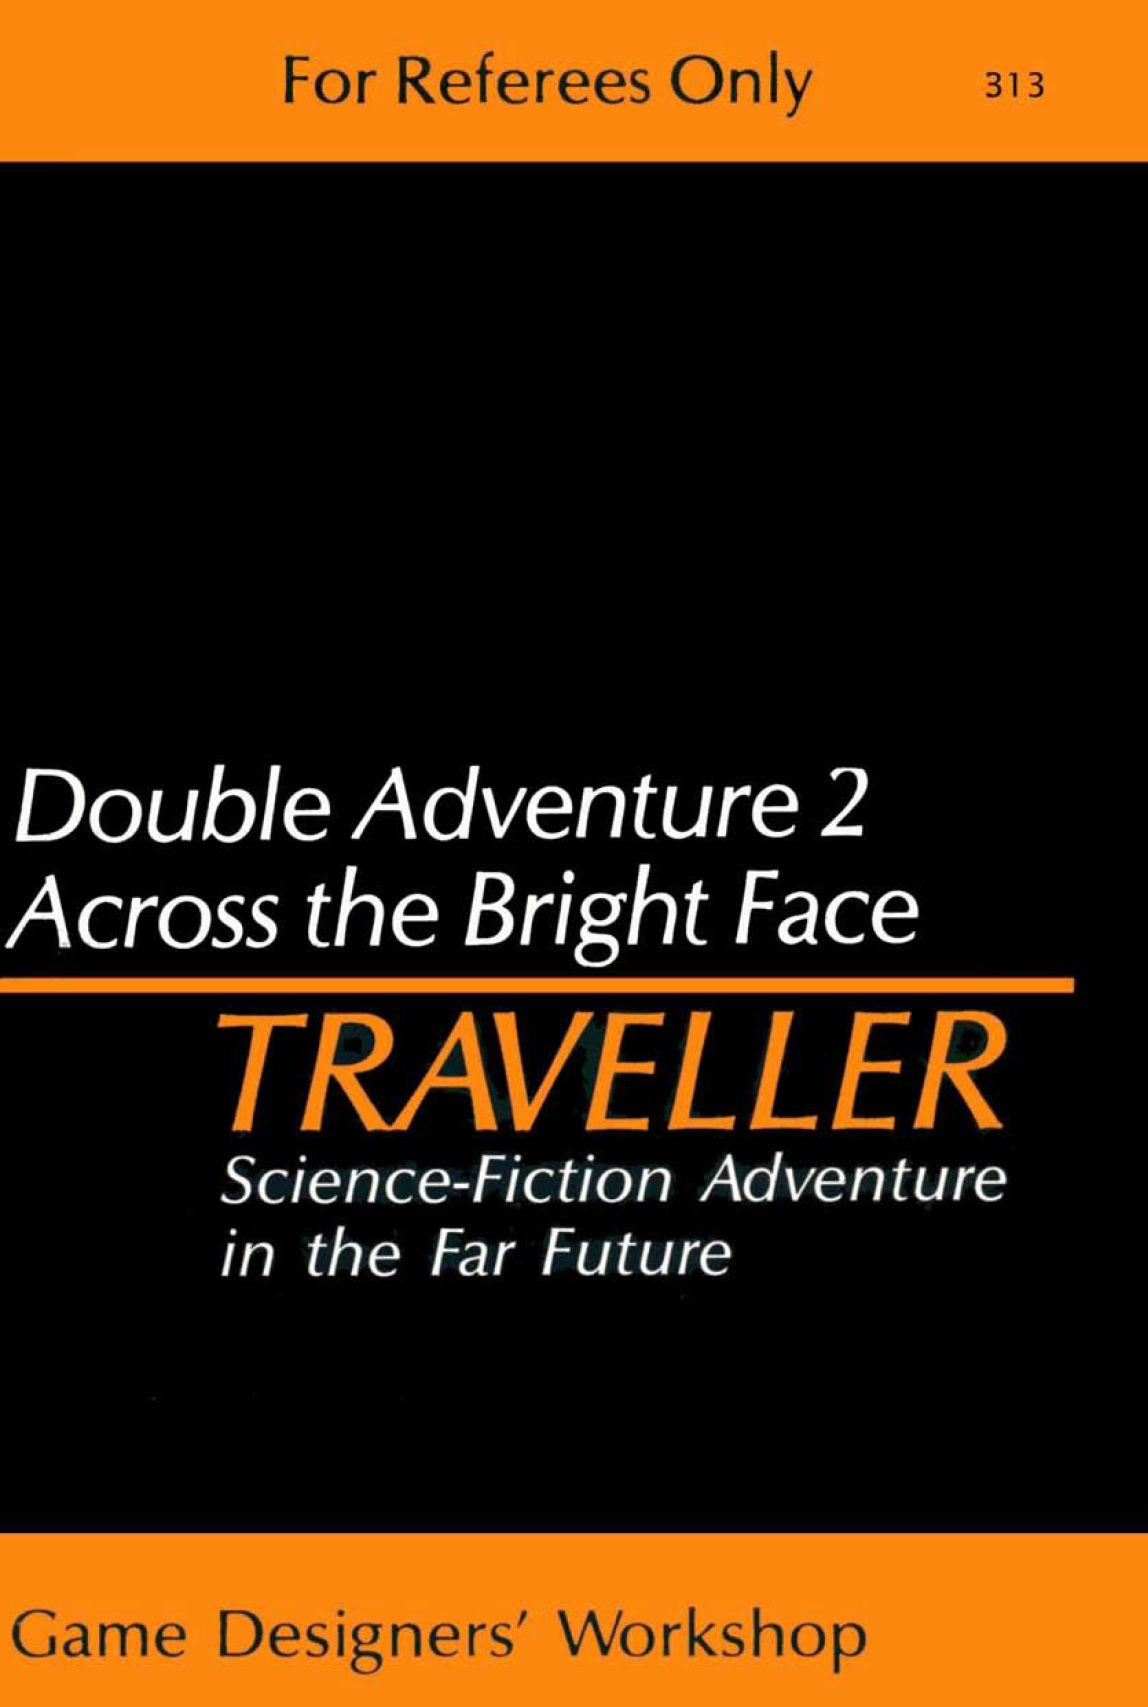 Double Adventure 2: Across the Bright Face/Mission on Mithril ebook